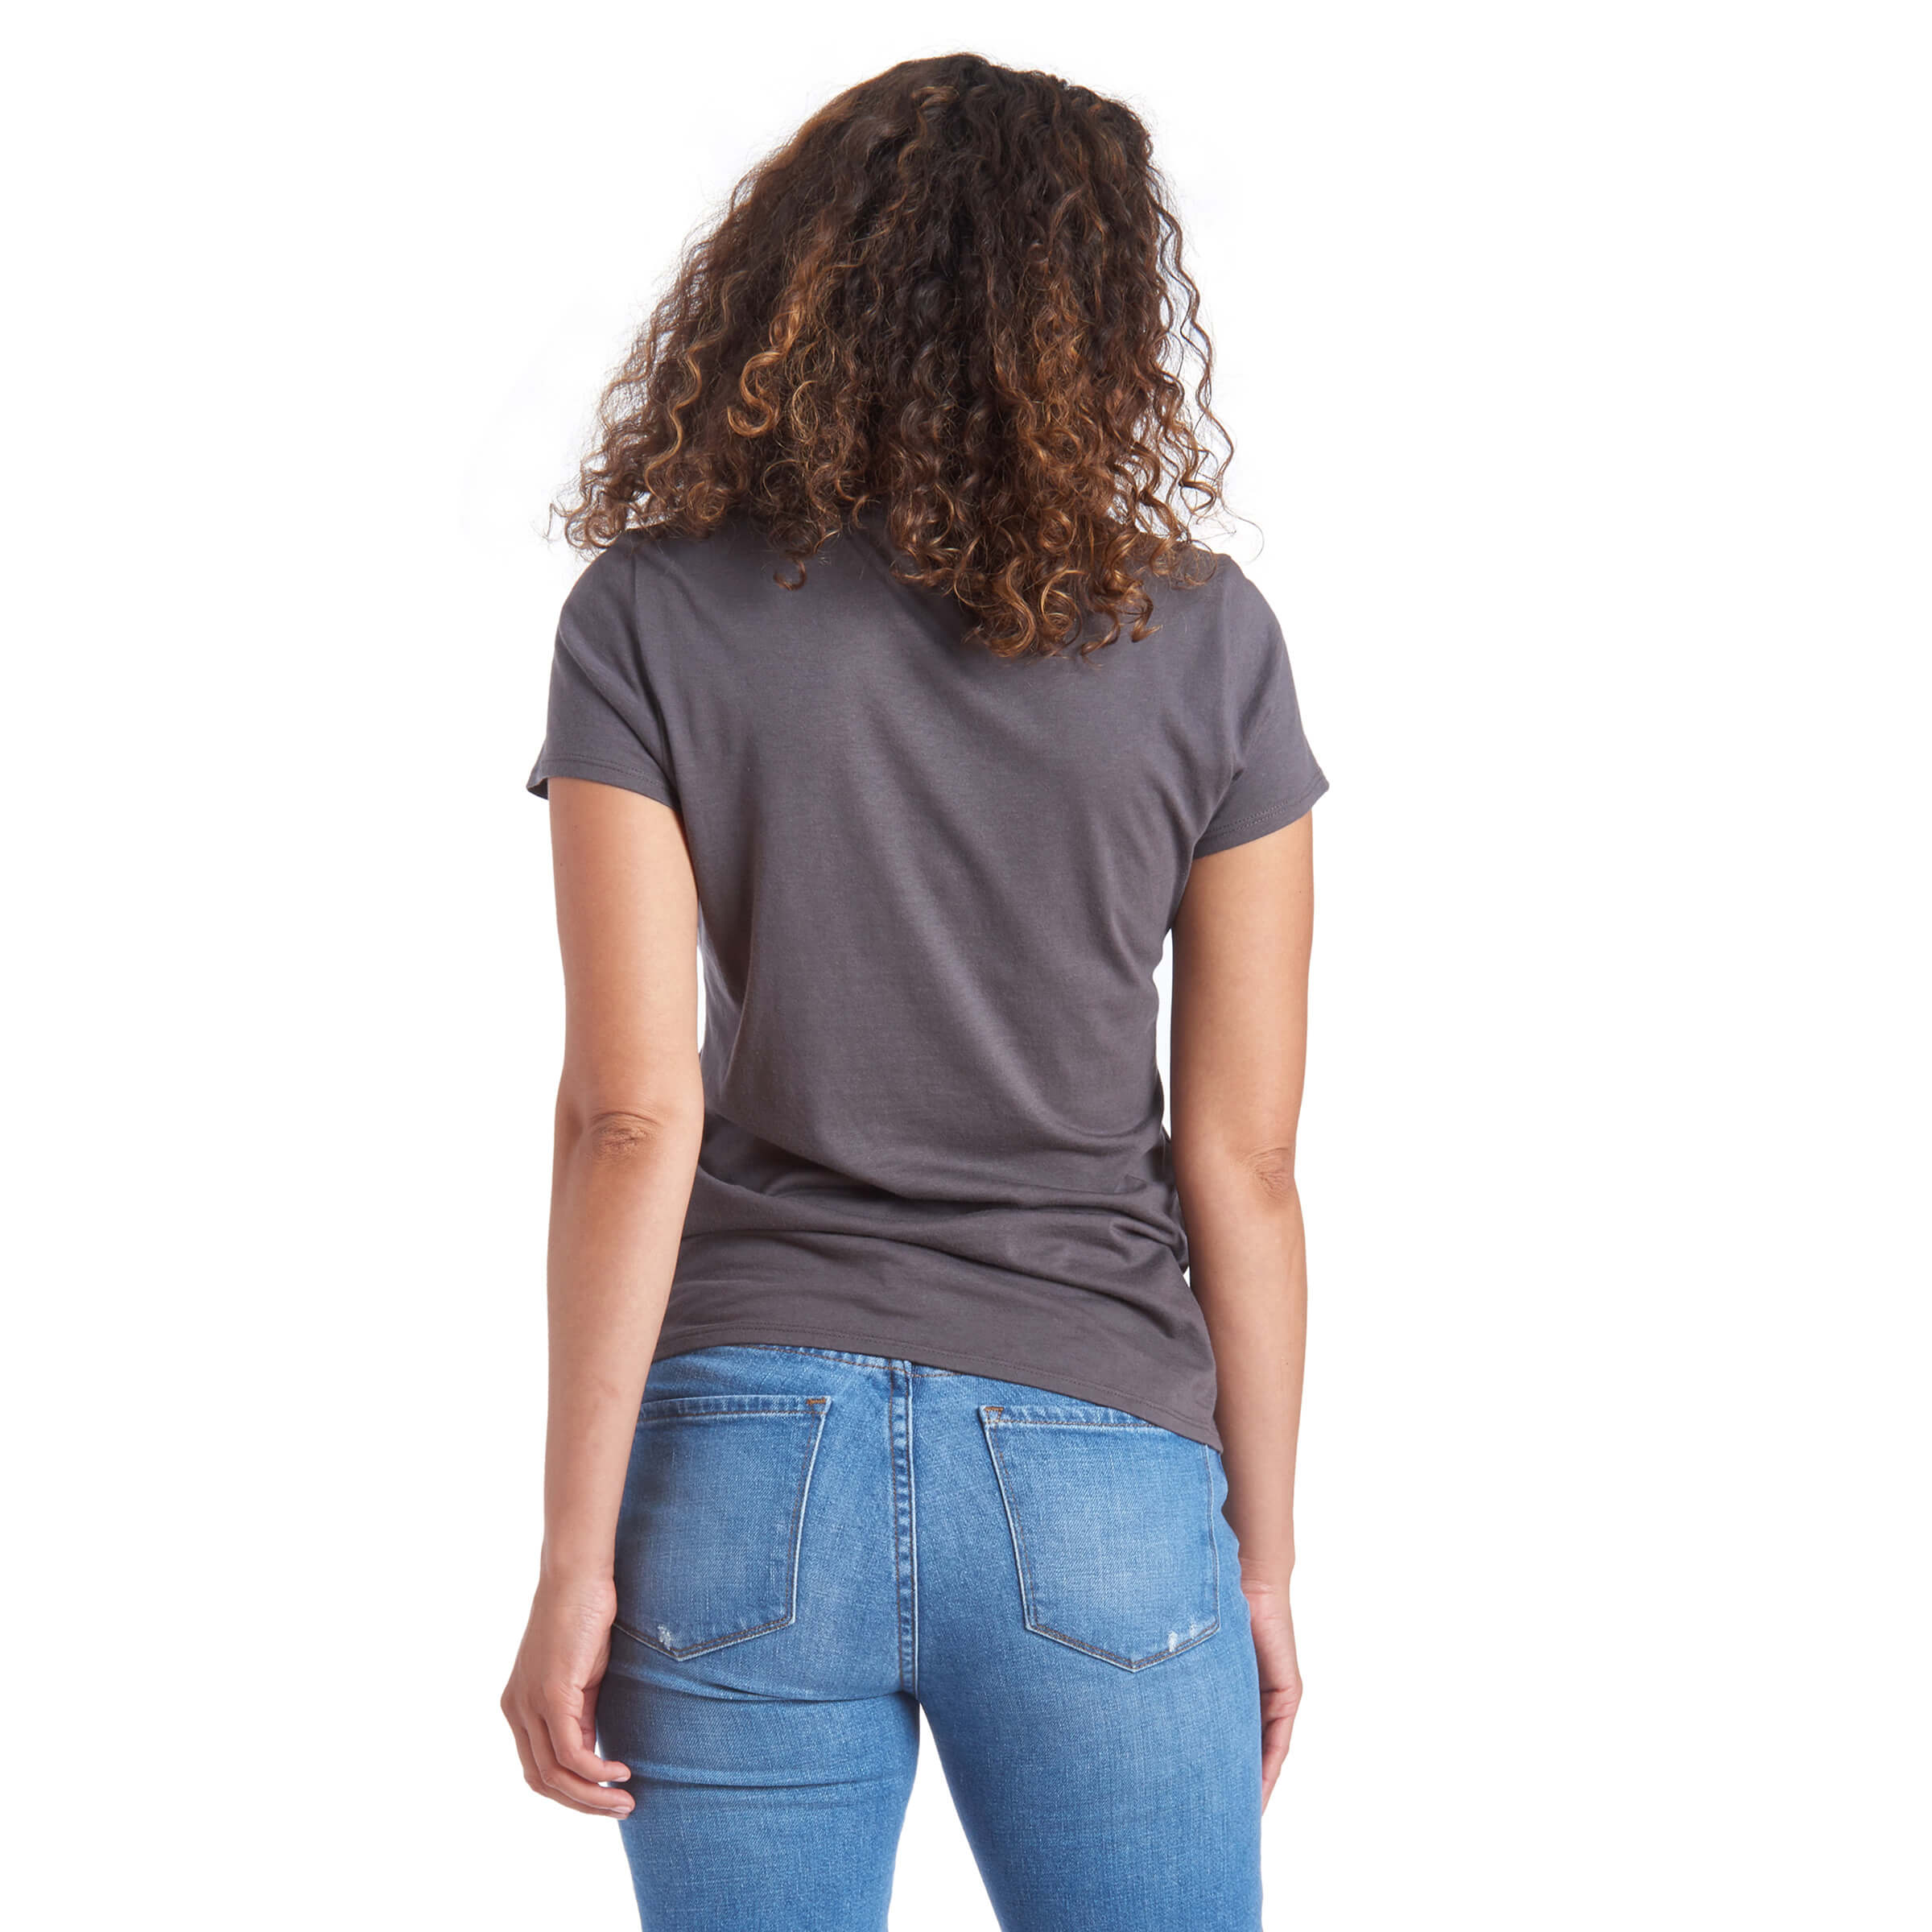 Women wearing Gris Nuit Fitted V-Neck Marcy Tee